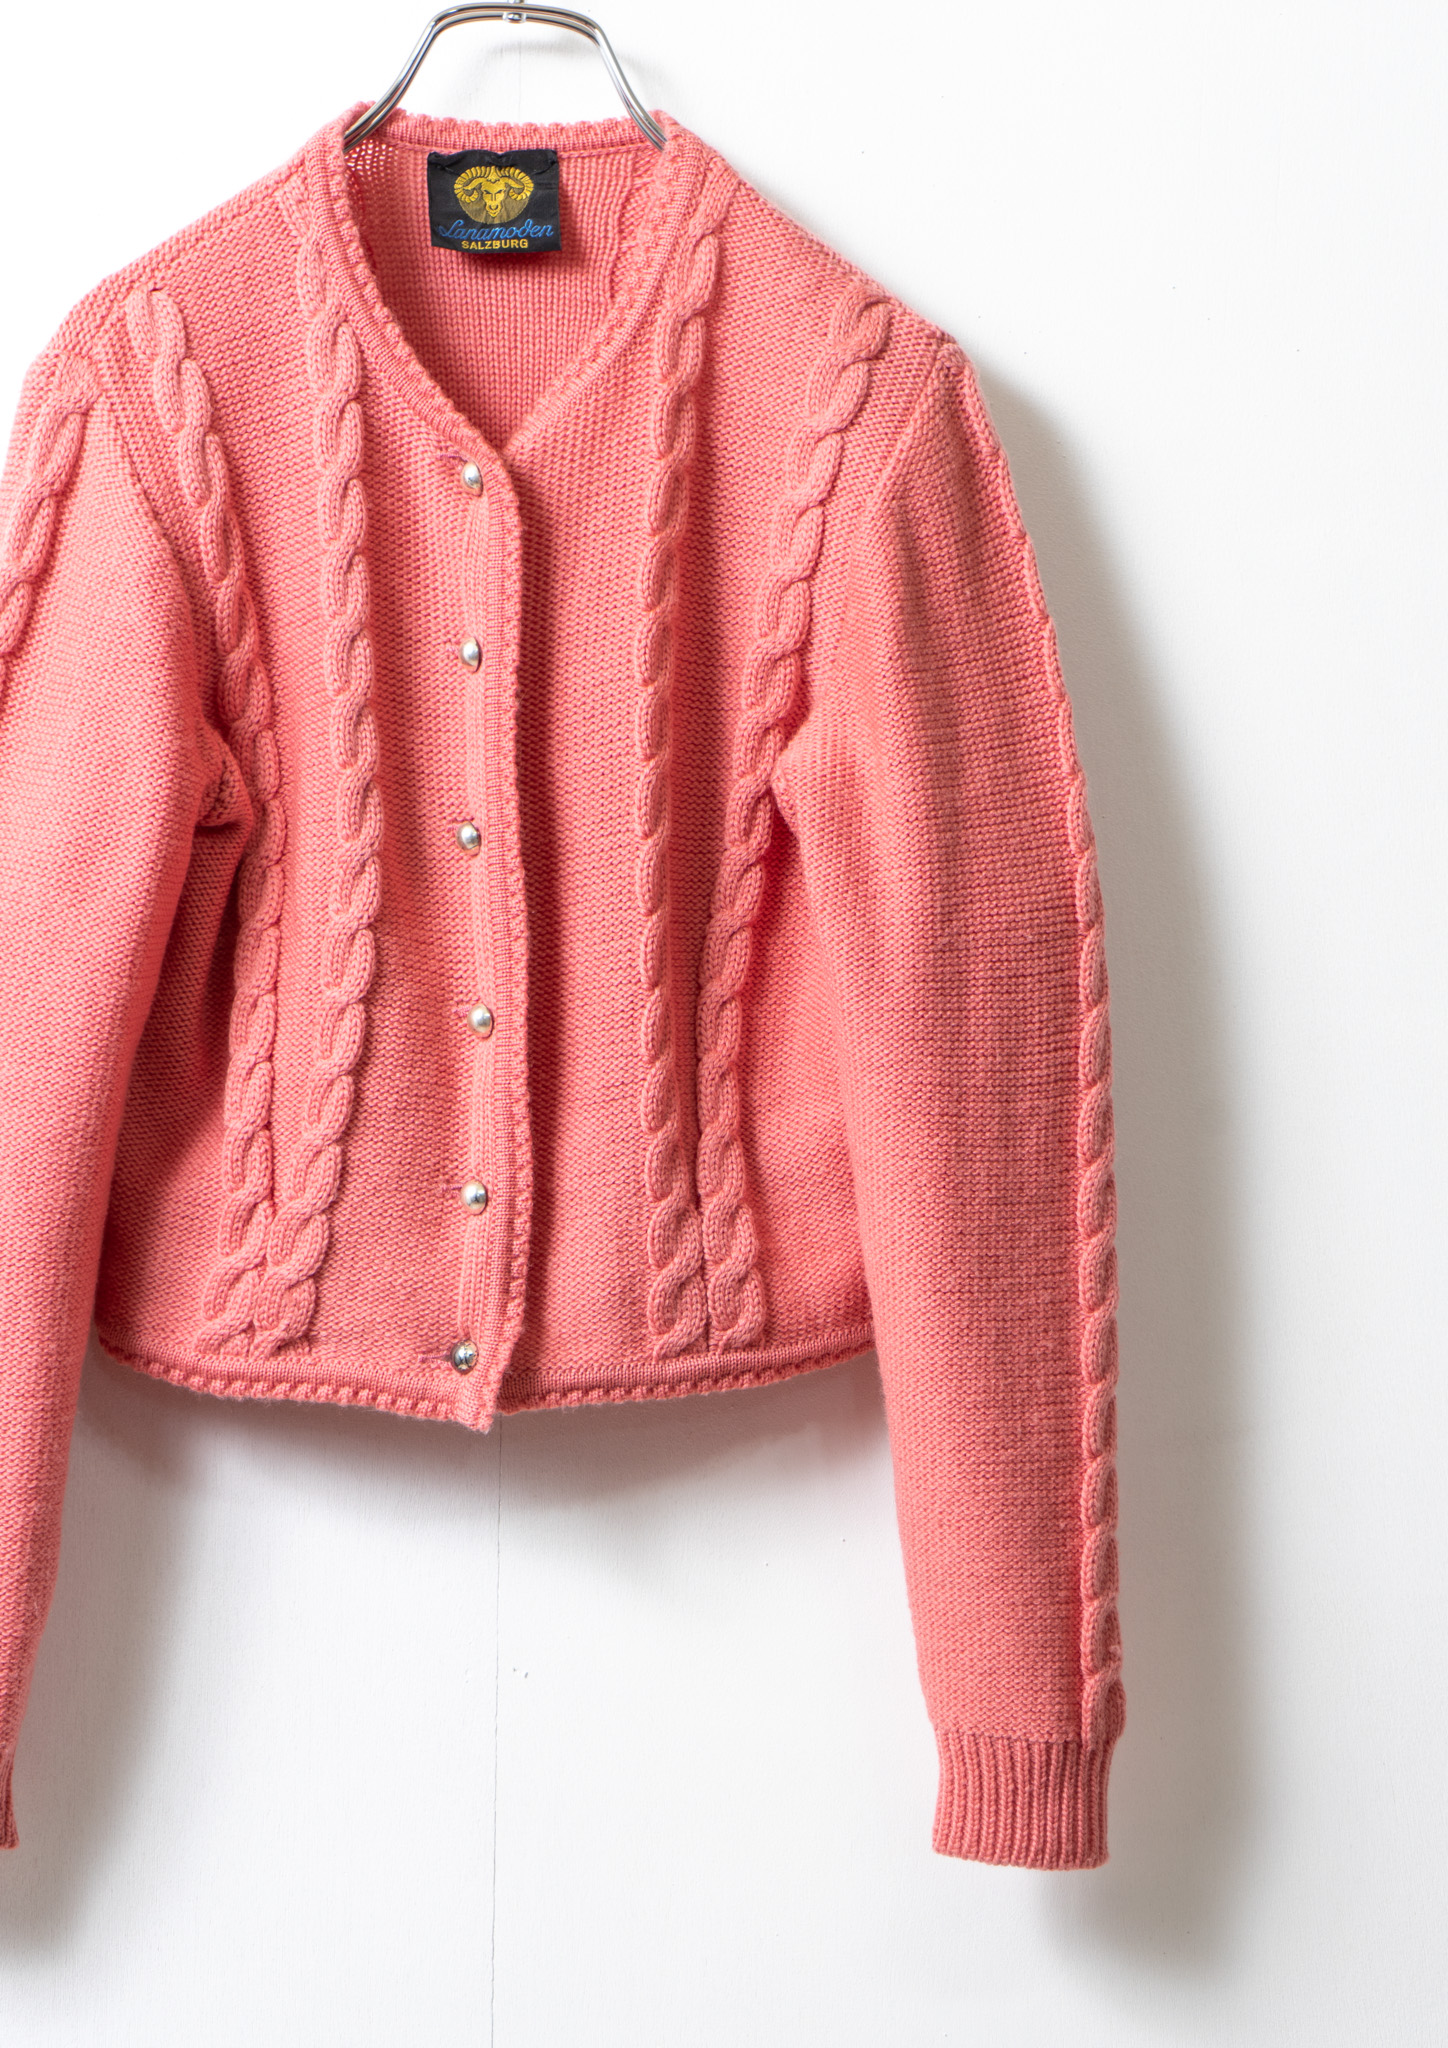 80's Made In Euro Cropped Design Pink Knit Cardigan - Bernet